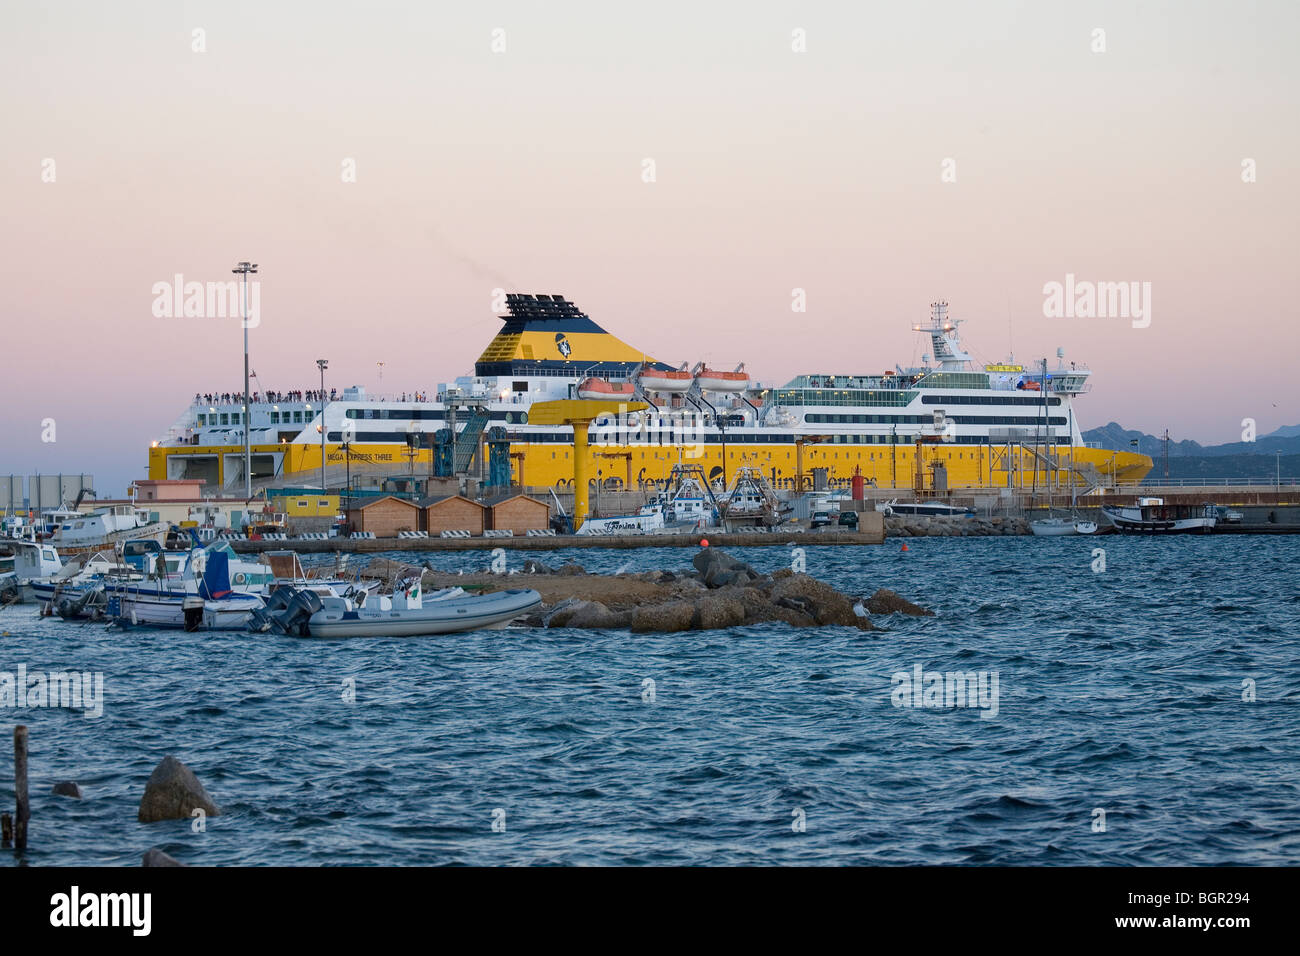 A ferry from Corsica Sardinia Ferries at Golfo Aranci. Stock Photo